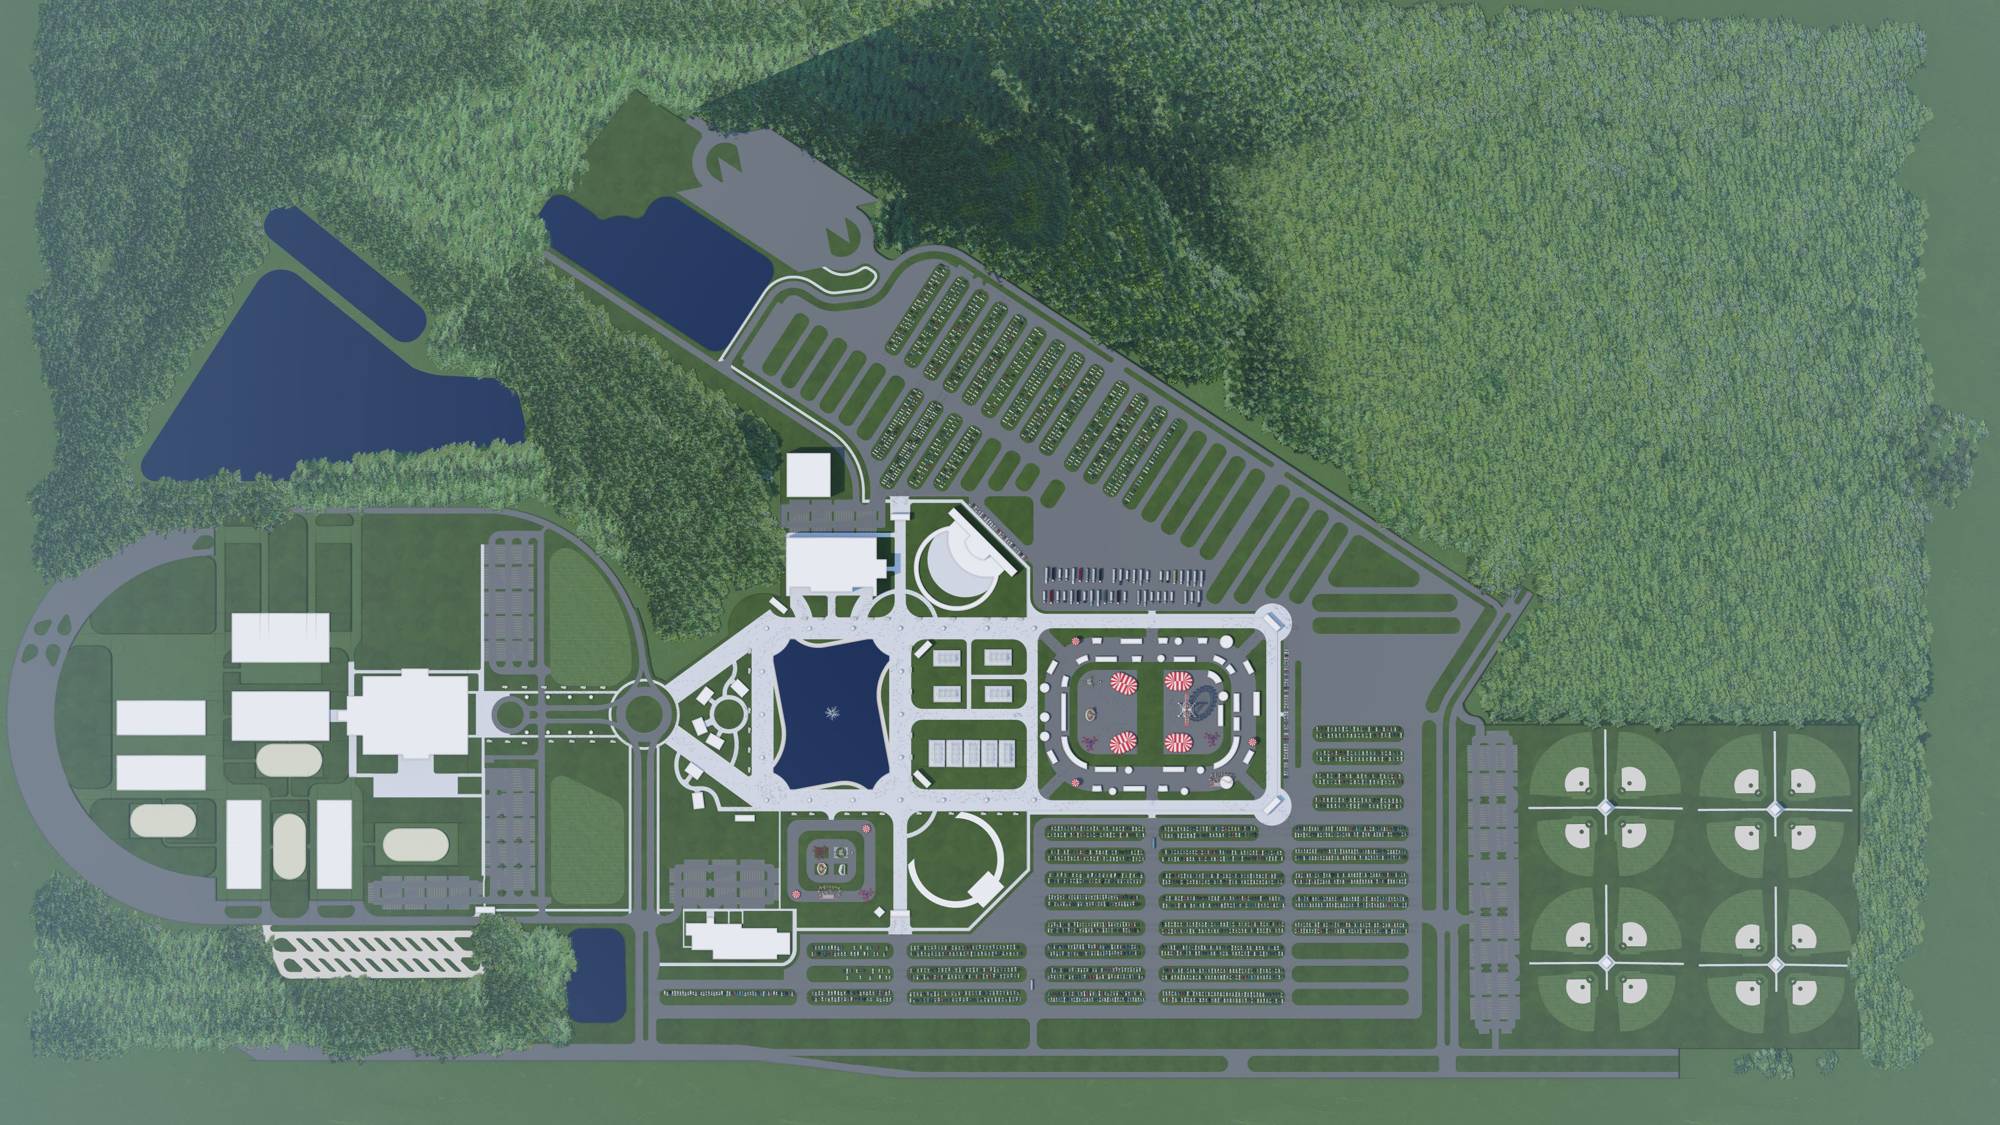 A potential site plan for the future fairgrounds.